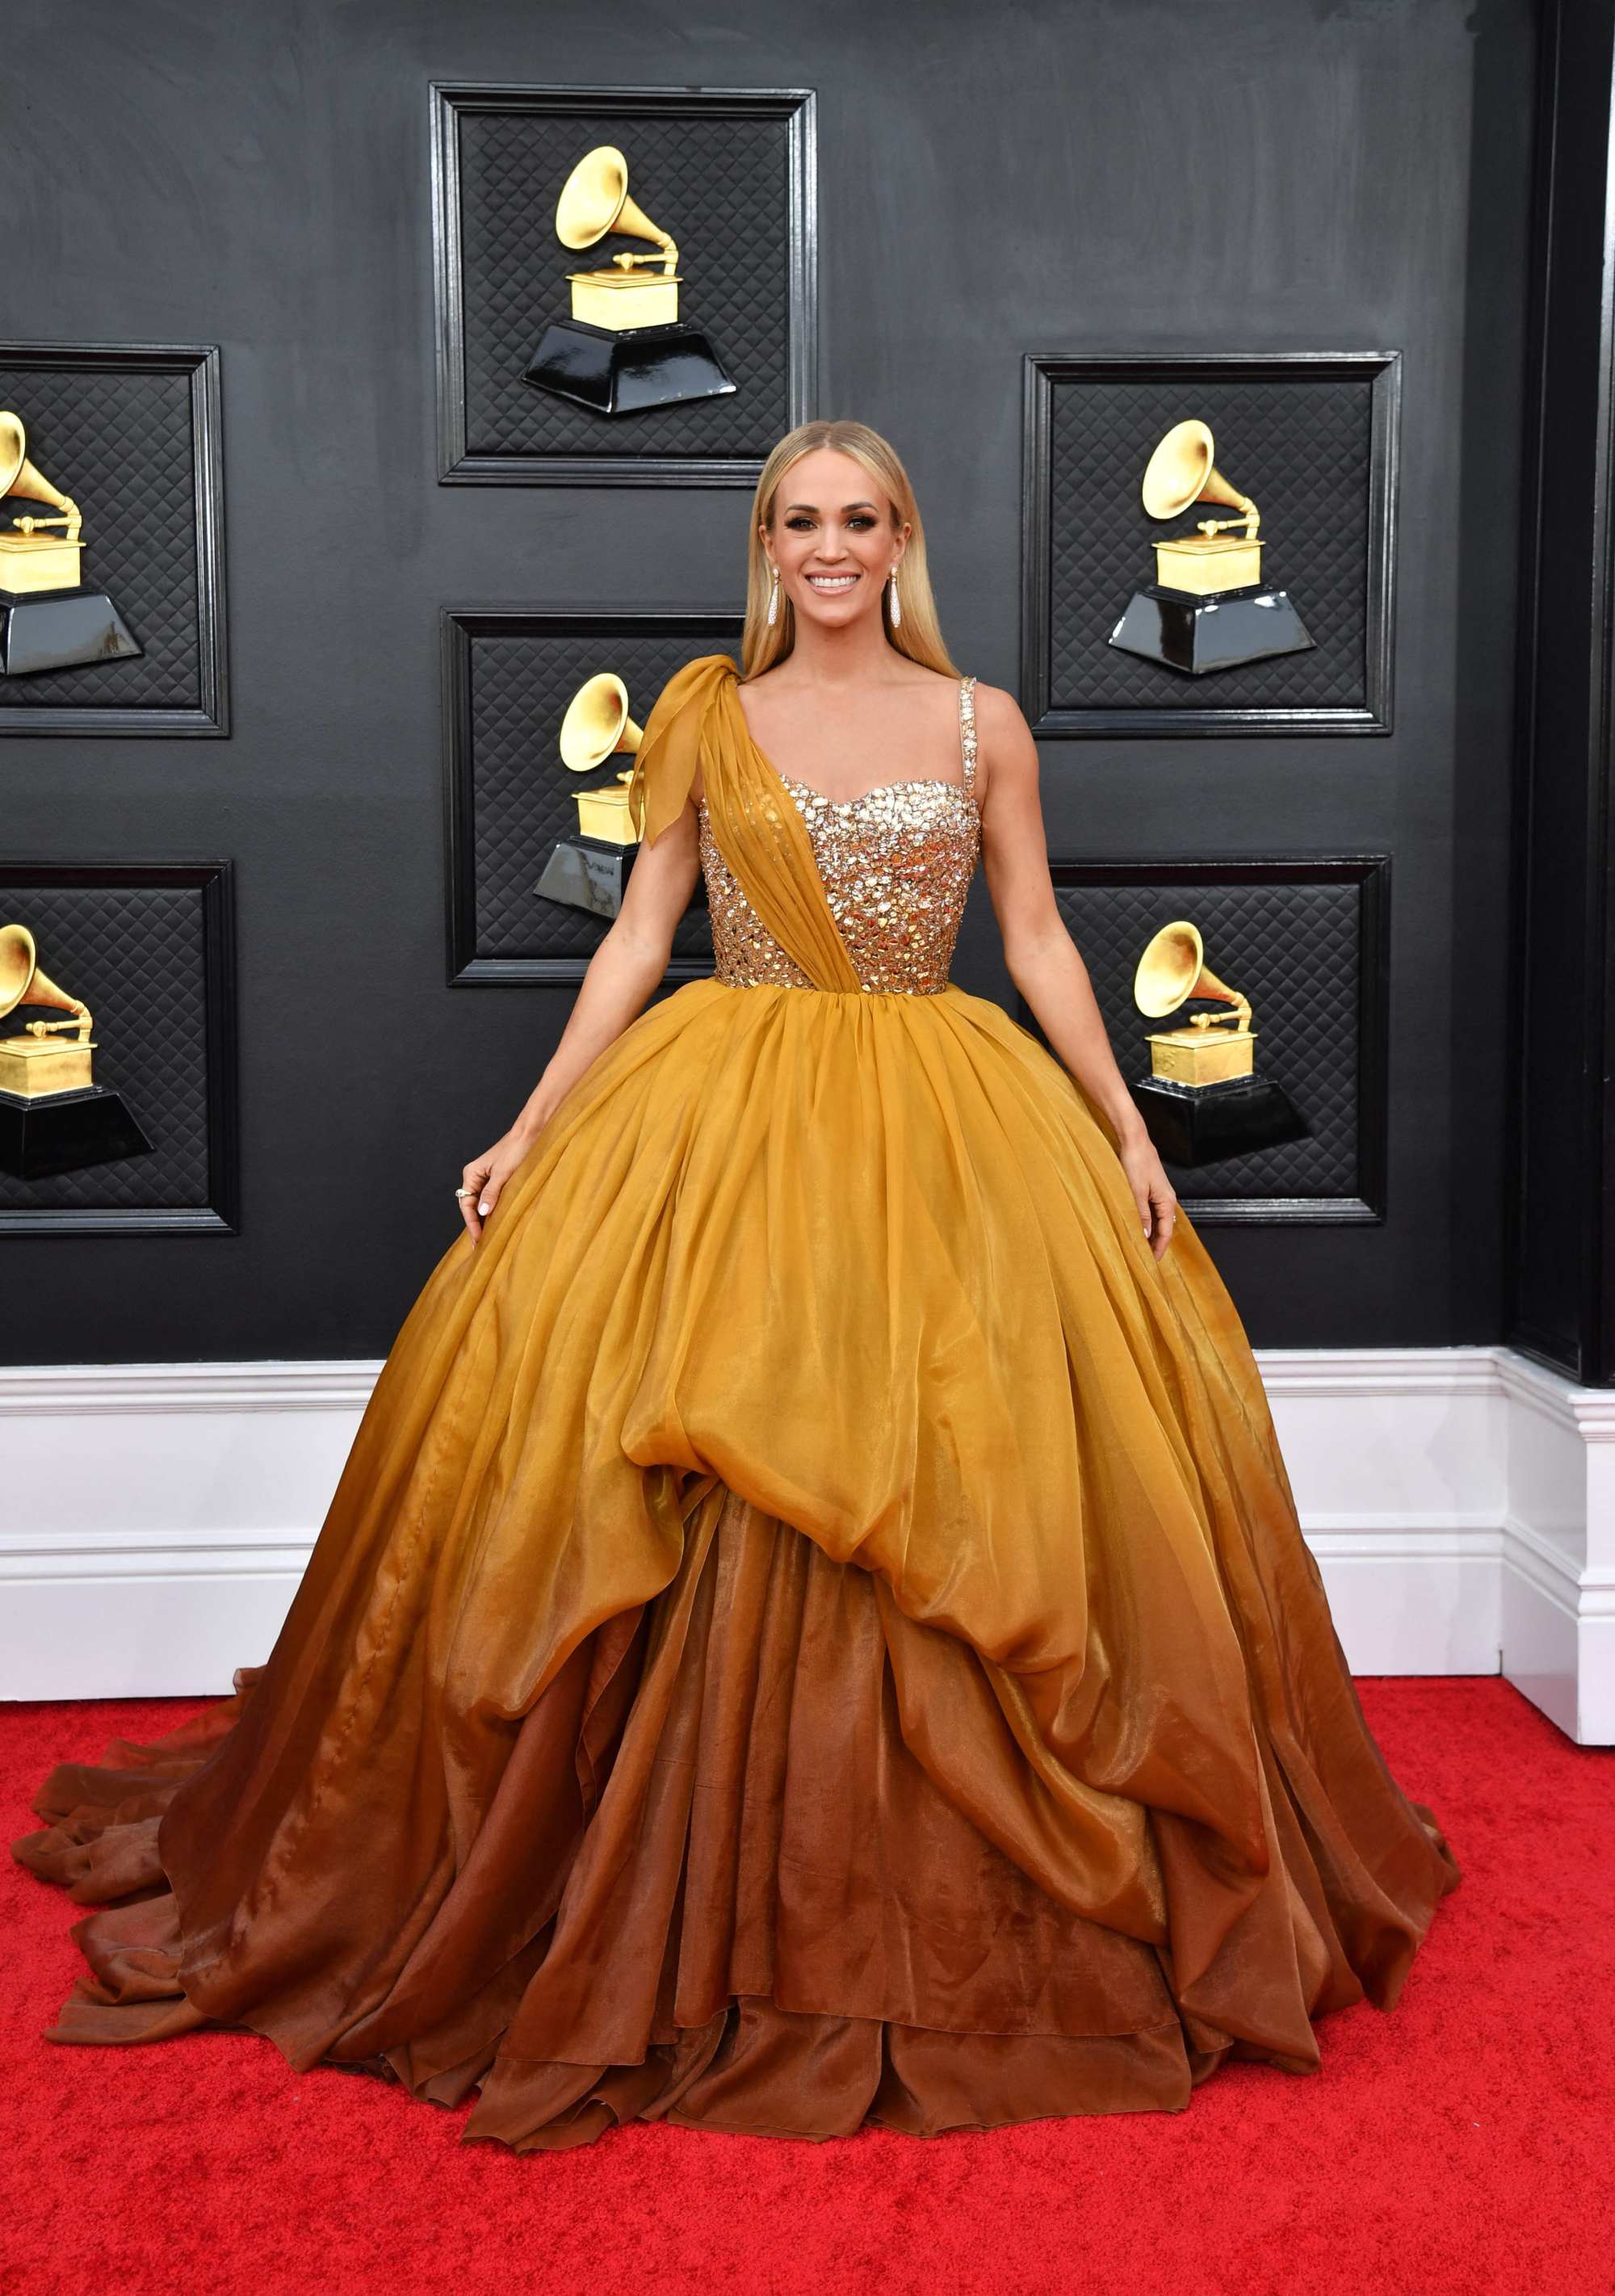 US singer/songwriter Carrie Underwood’s look was more beauty pageant than red carpet ready. Photo: AFP